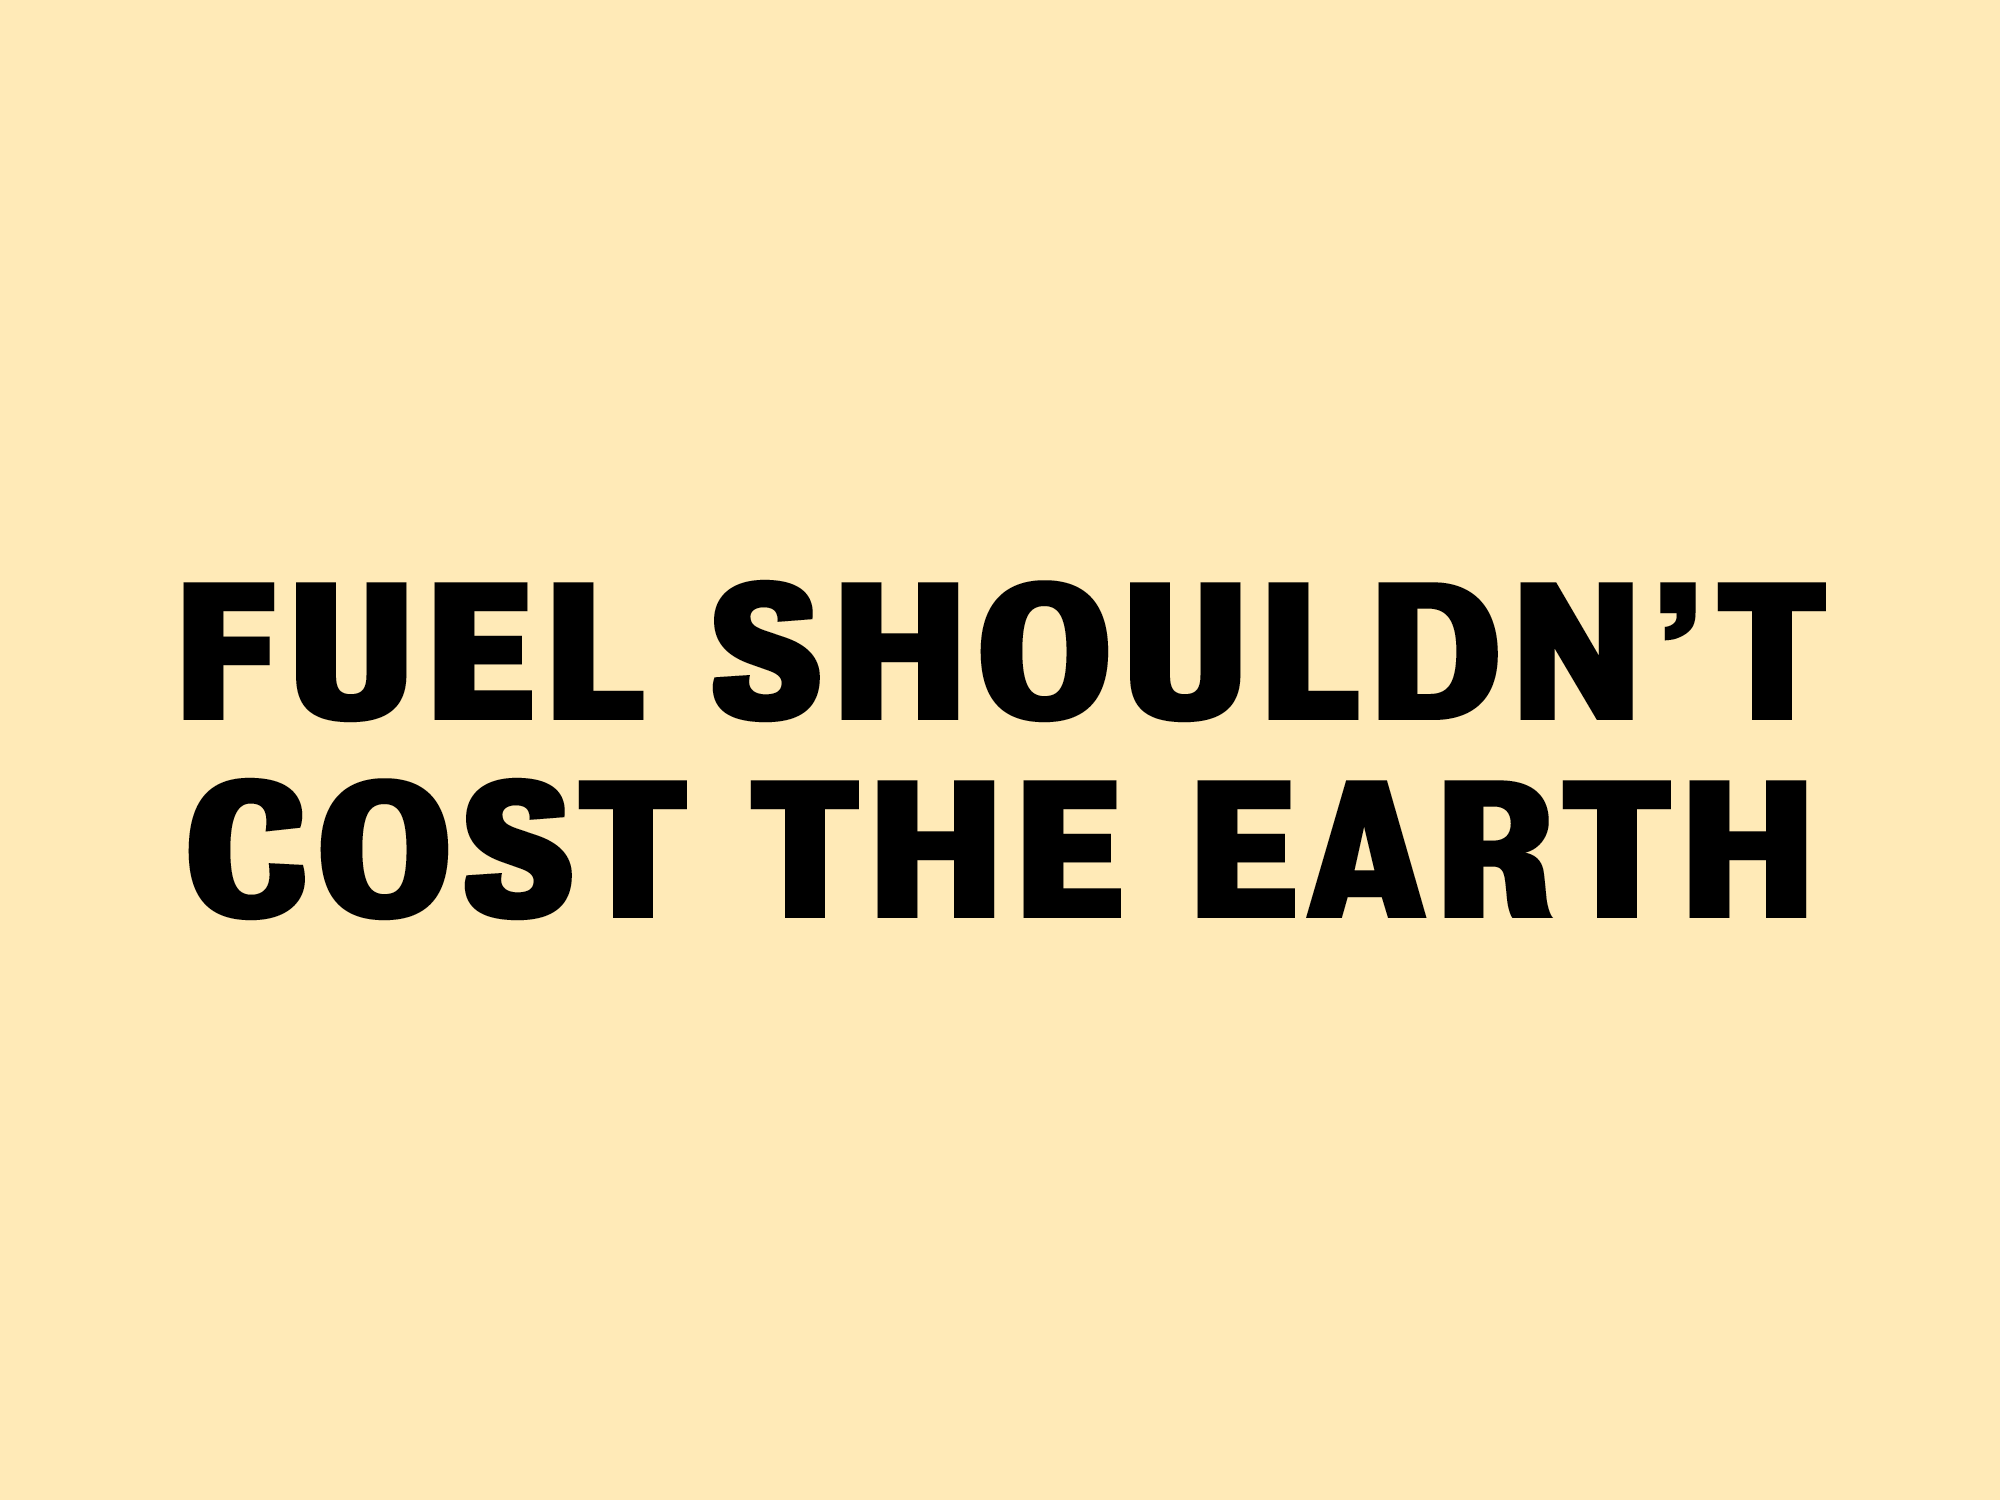 ON EARTH DAY, WE WANT TO TALK ABOUT FUEL POVERTY.